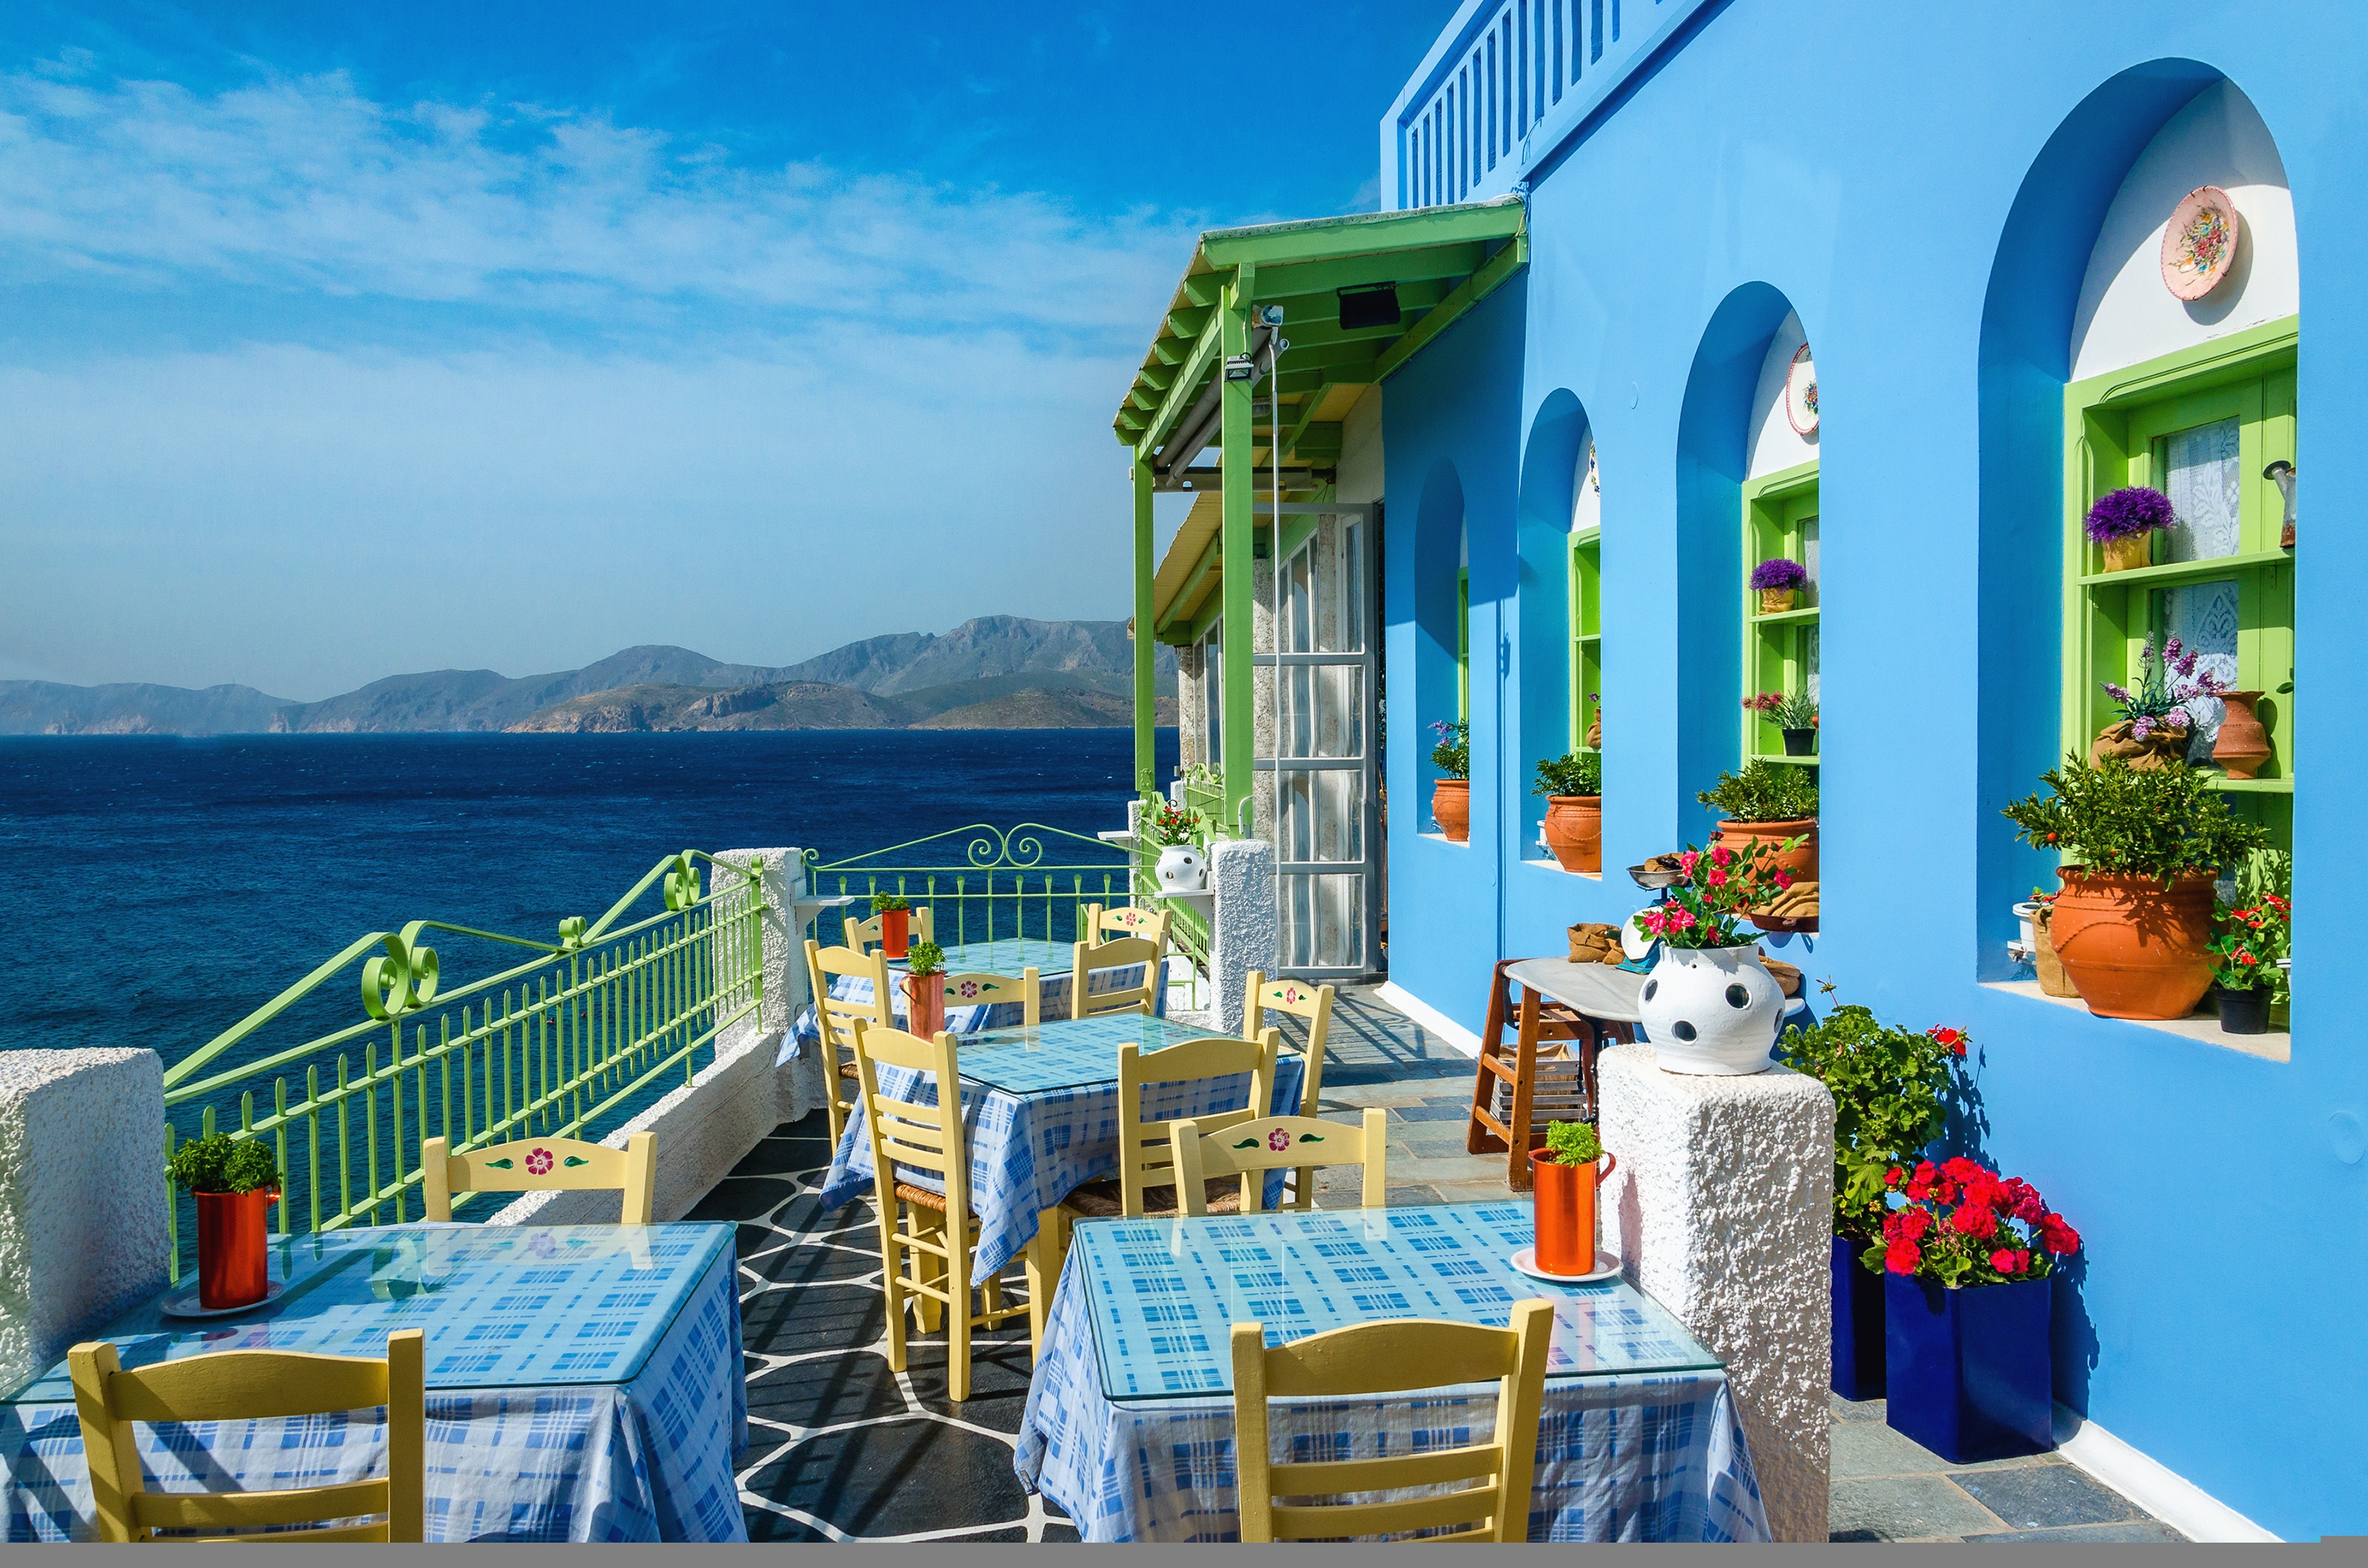 A scene of a colourful restaurant with an ocean view in Crete, Greece 